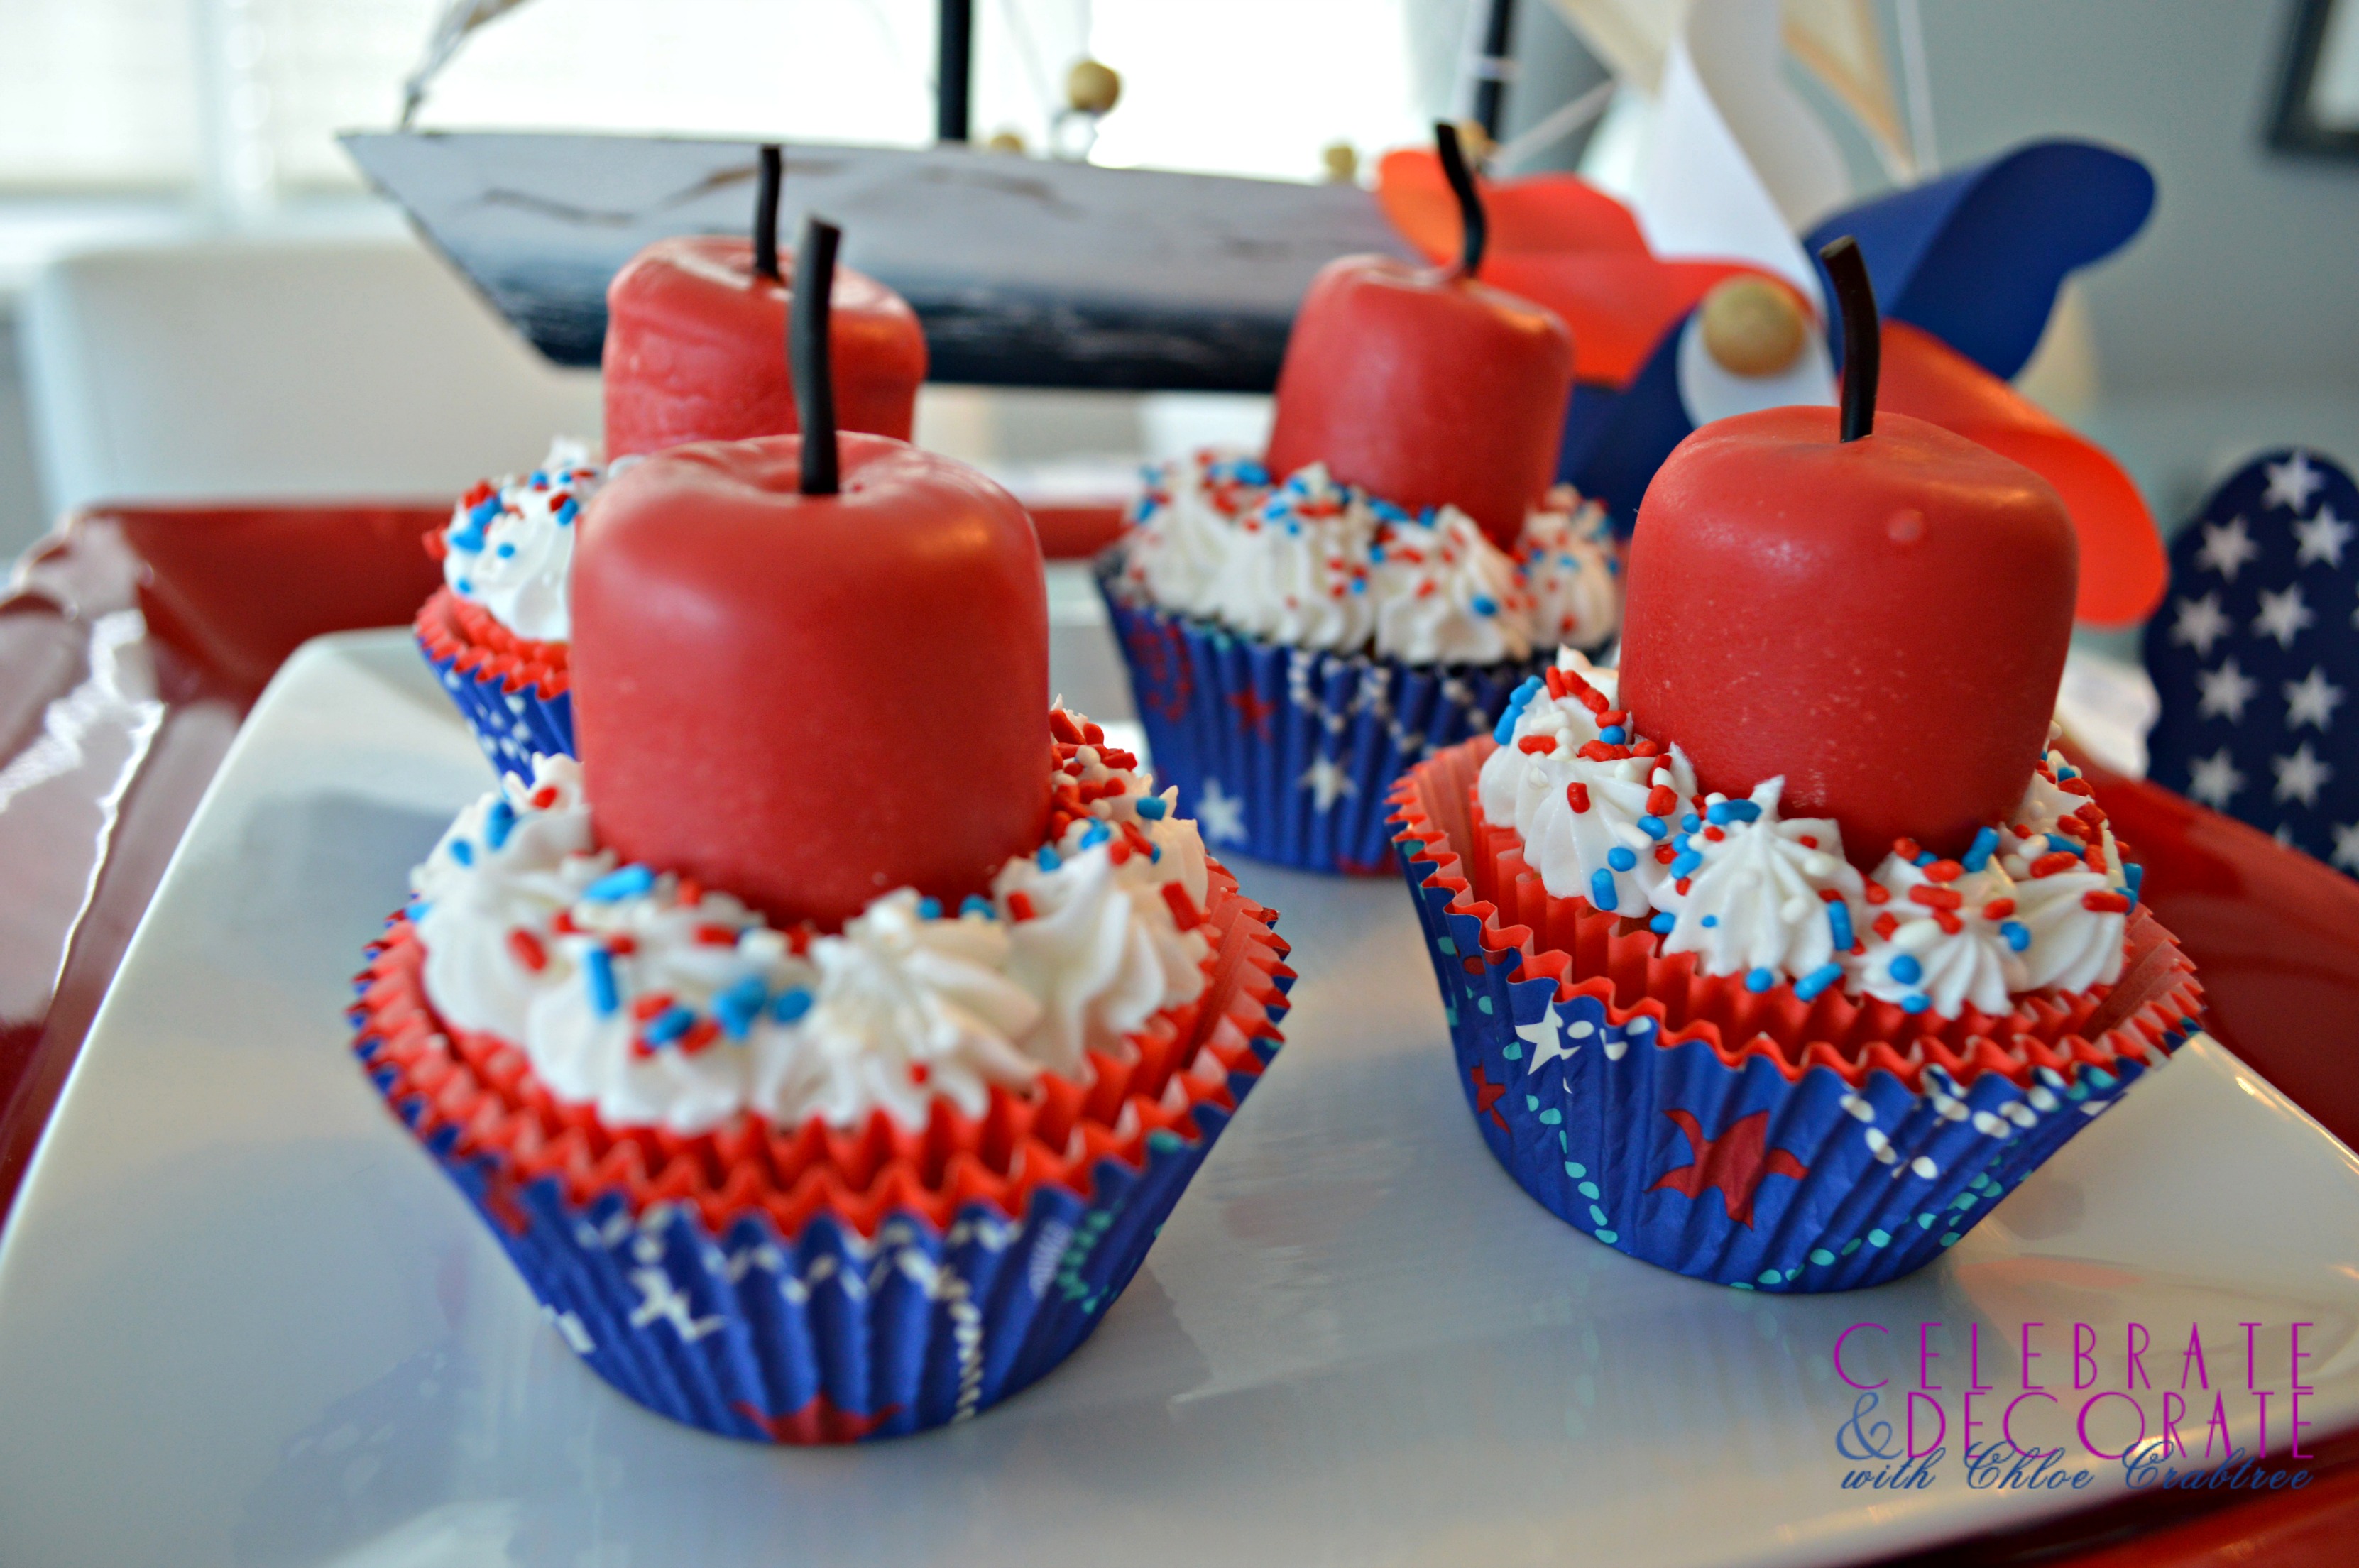 7 Ideas for Your Fourth of July Celebration